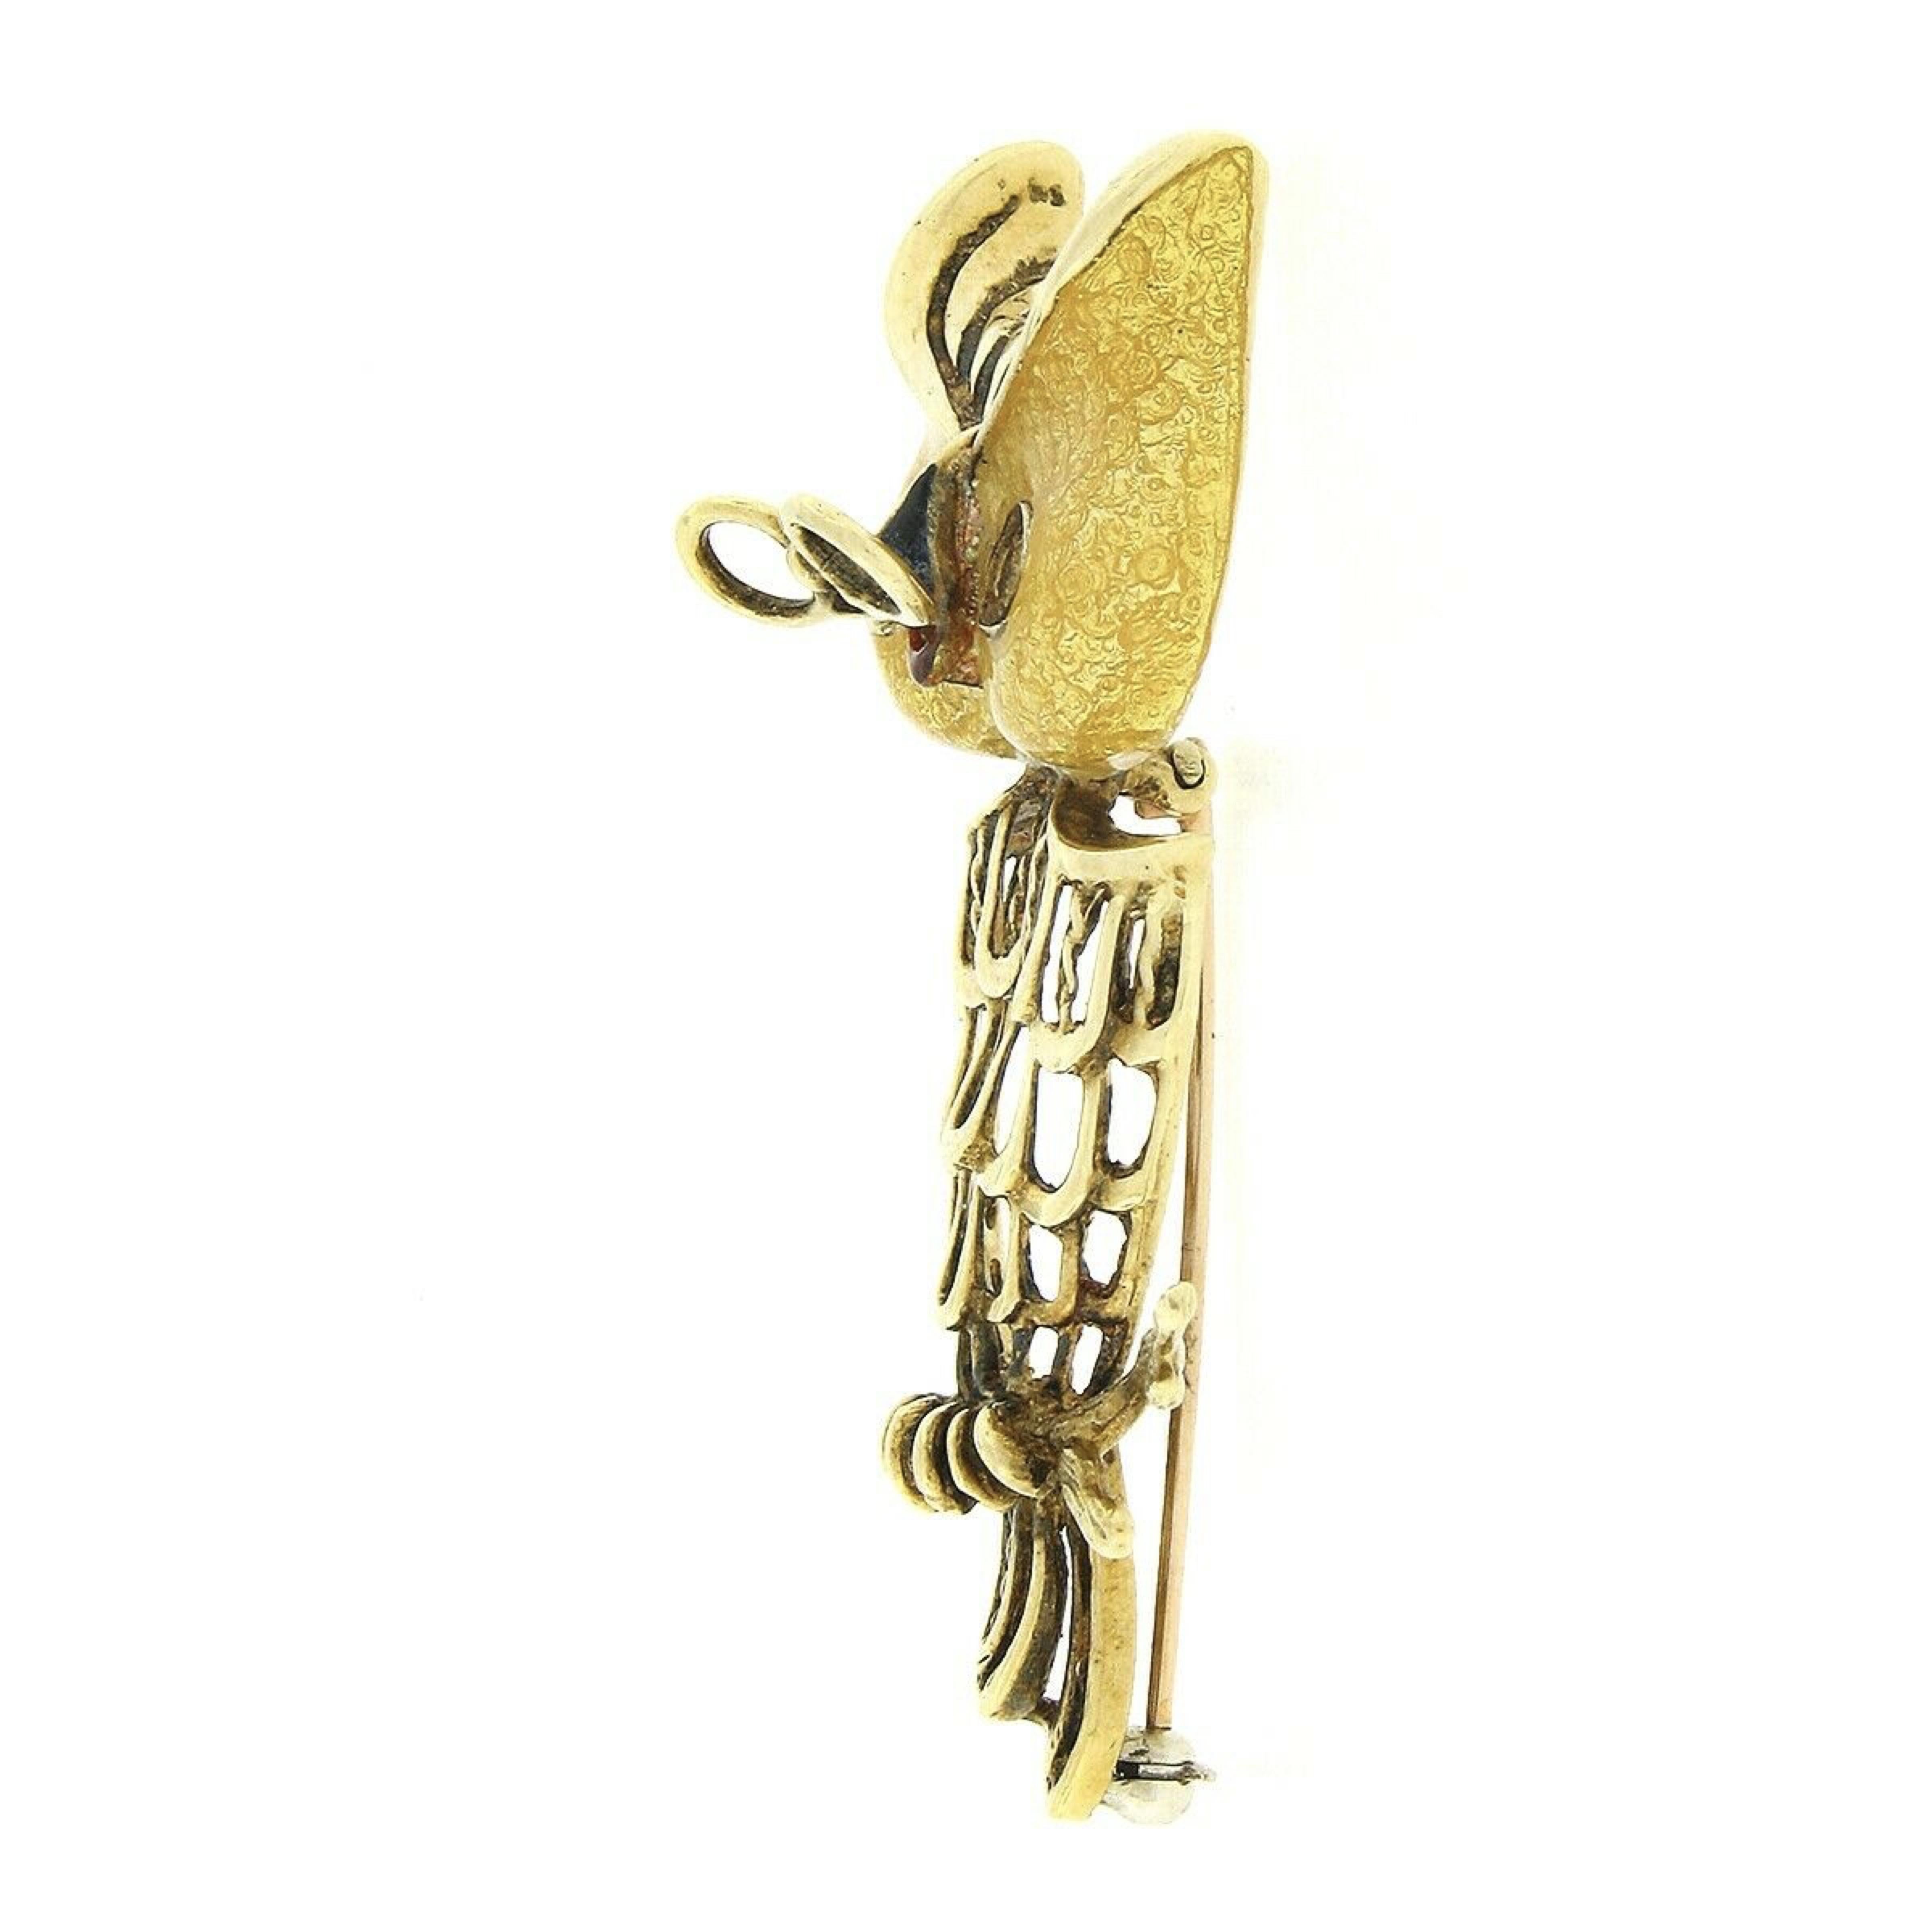 Vintage Detailed Textured 18k Gold Yellow Enamel Wise Owl on Branch Pin Brooch In Good Condition For Sale In Montclair, NJ